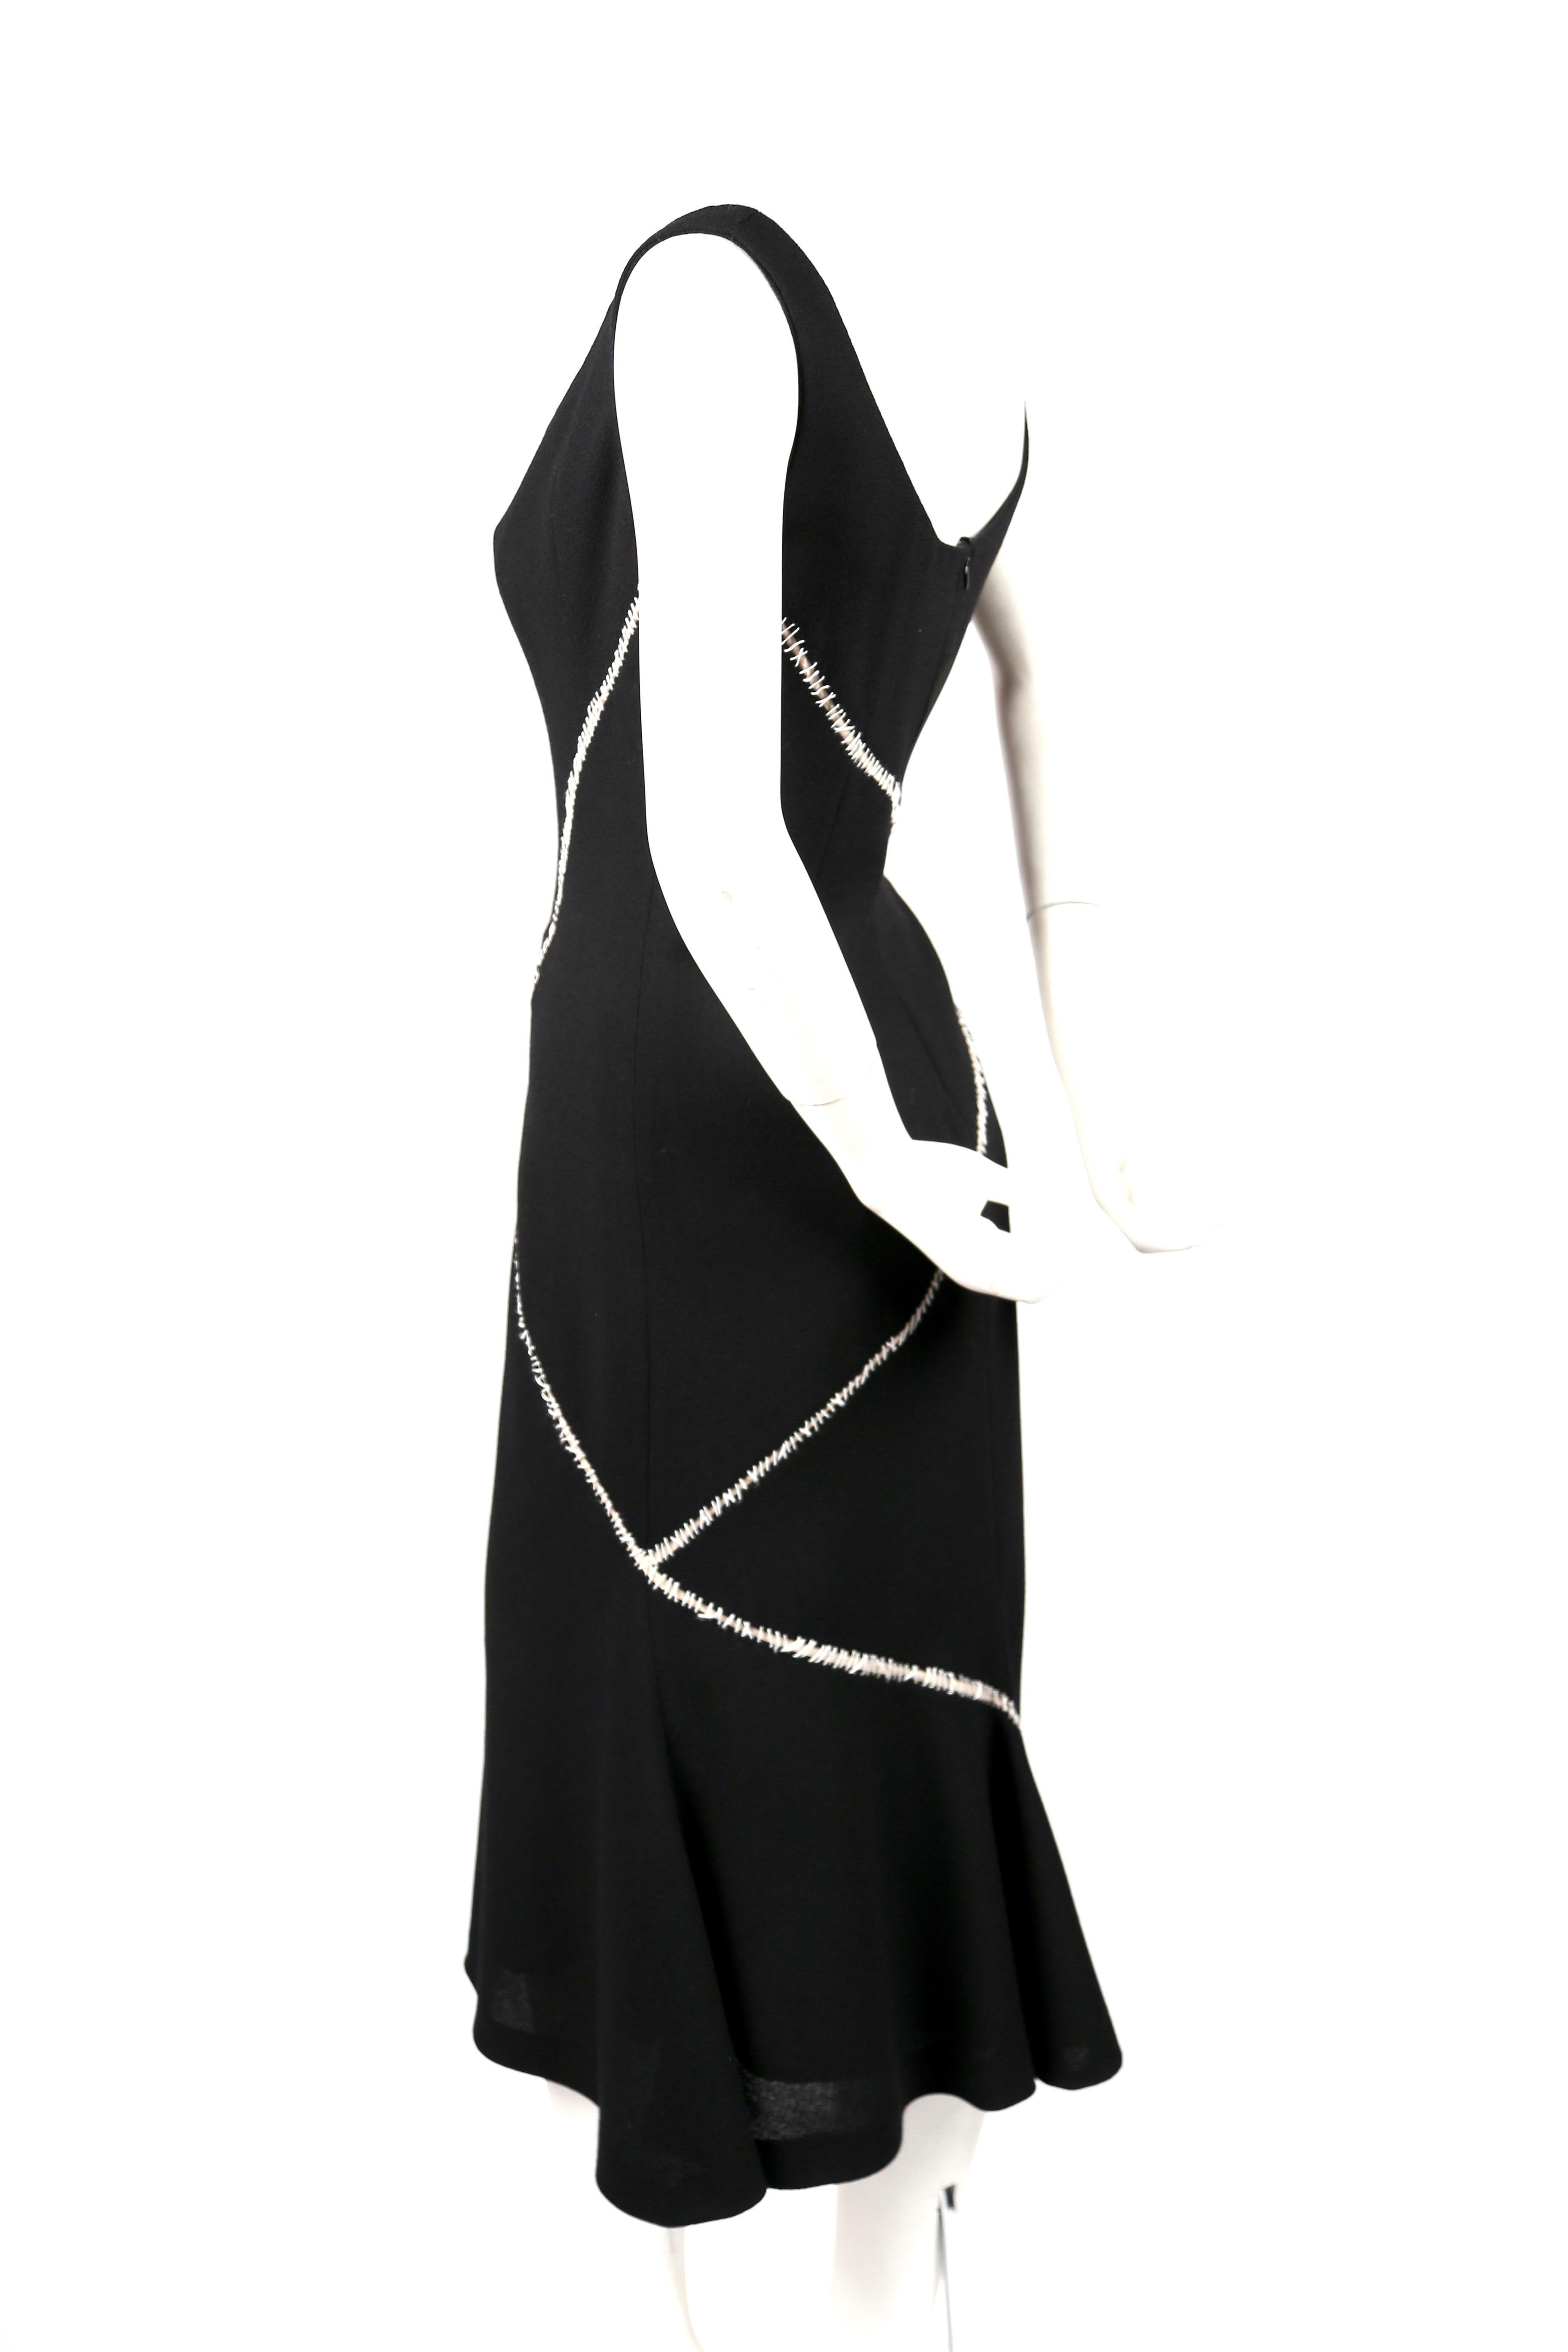 Black wool and silk crepe dress with decorative white stitched detail designed by Alexander McQueen circa 2004. Labeled an Italian size 42. Measures approximately: 34